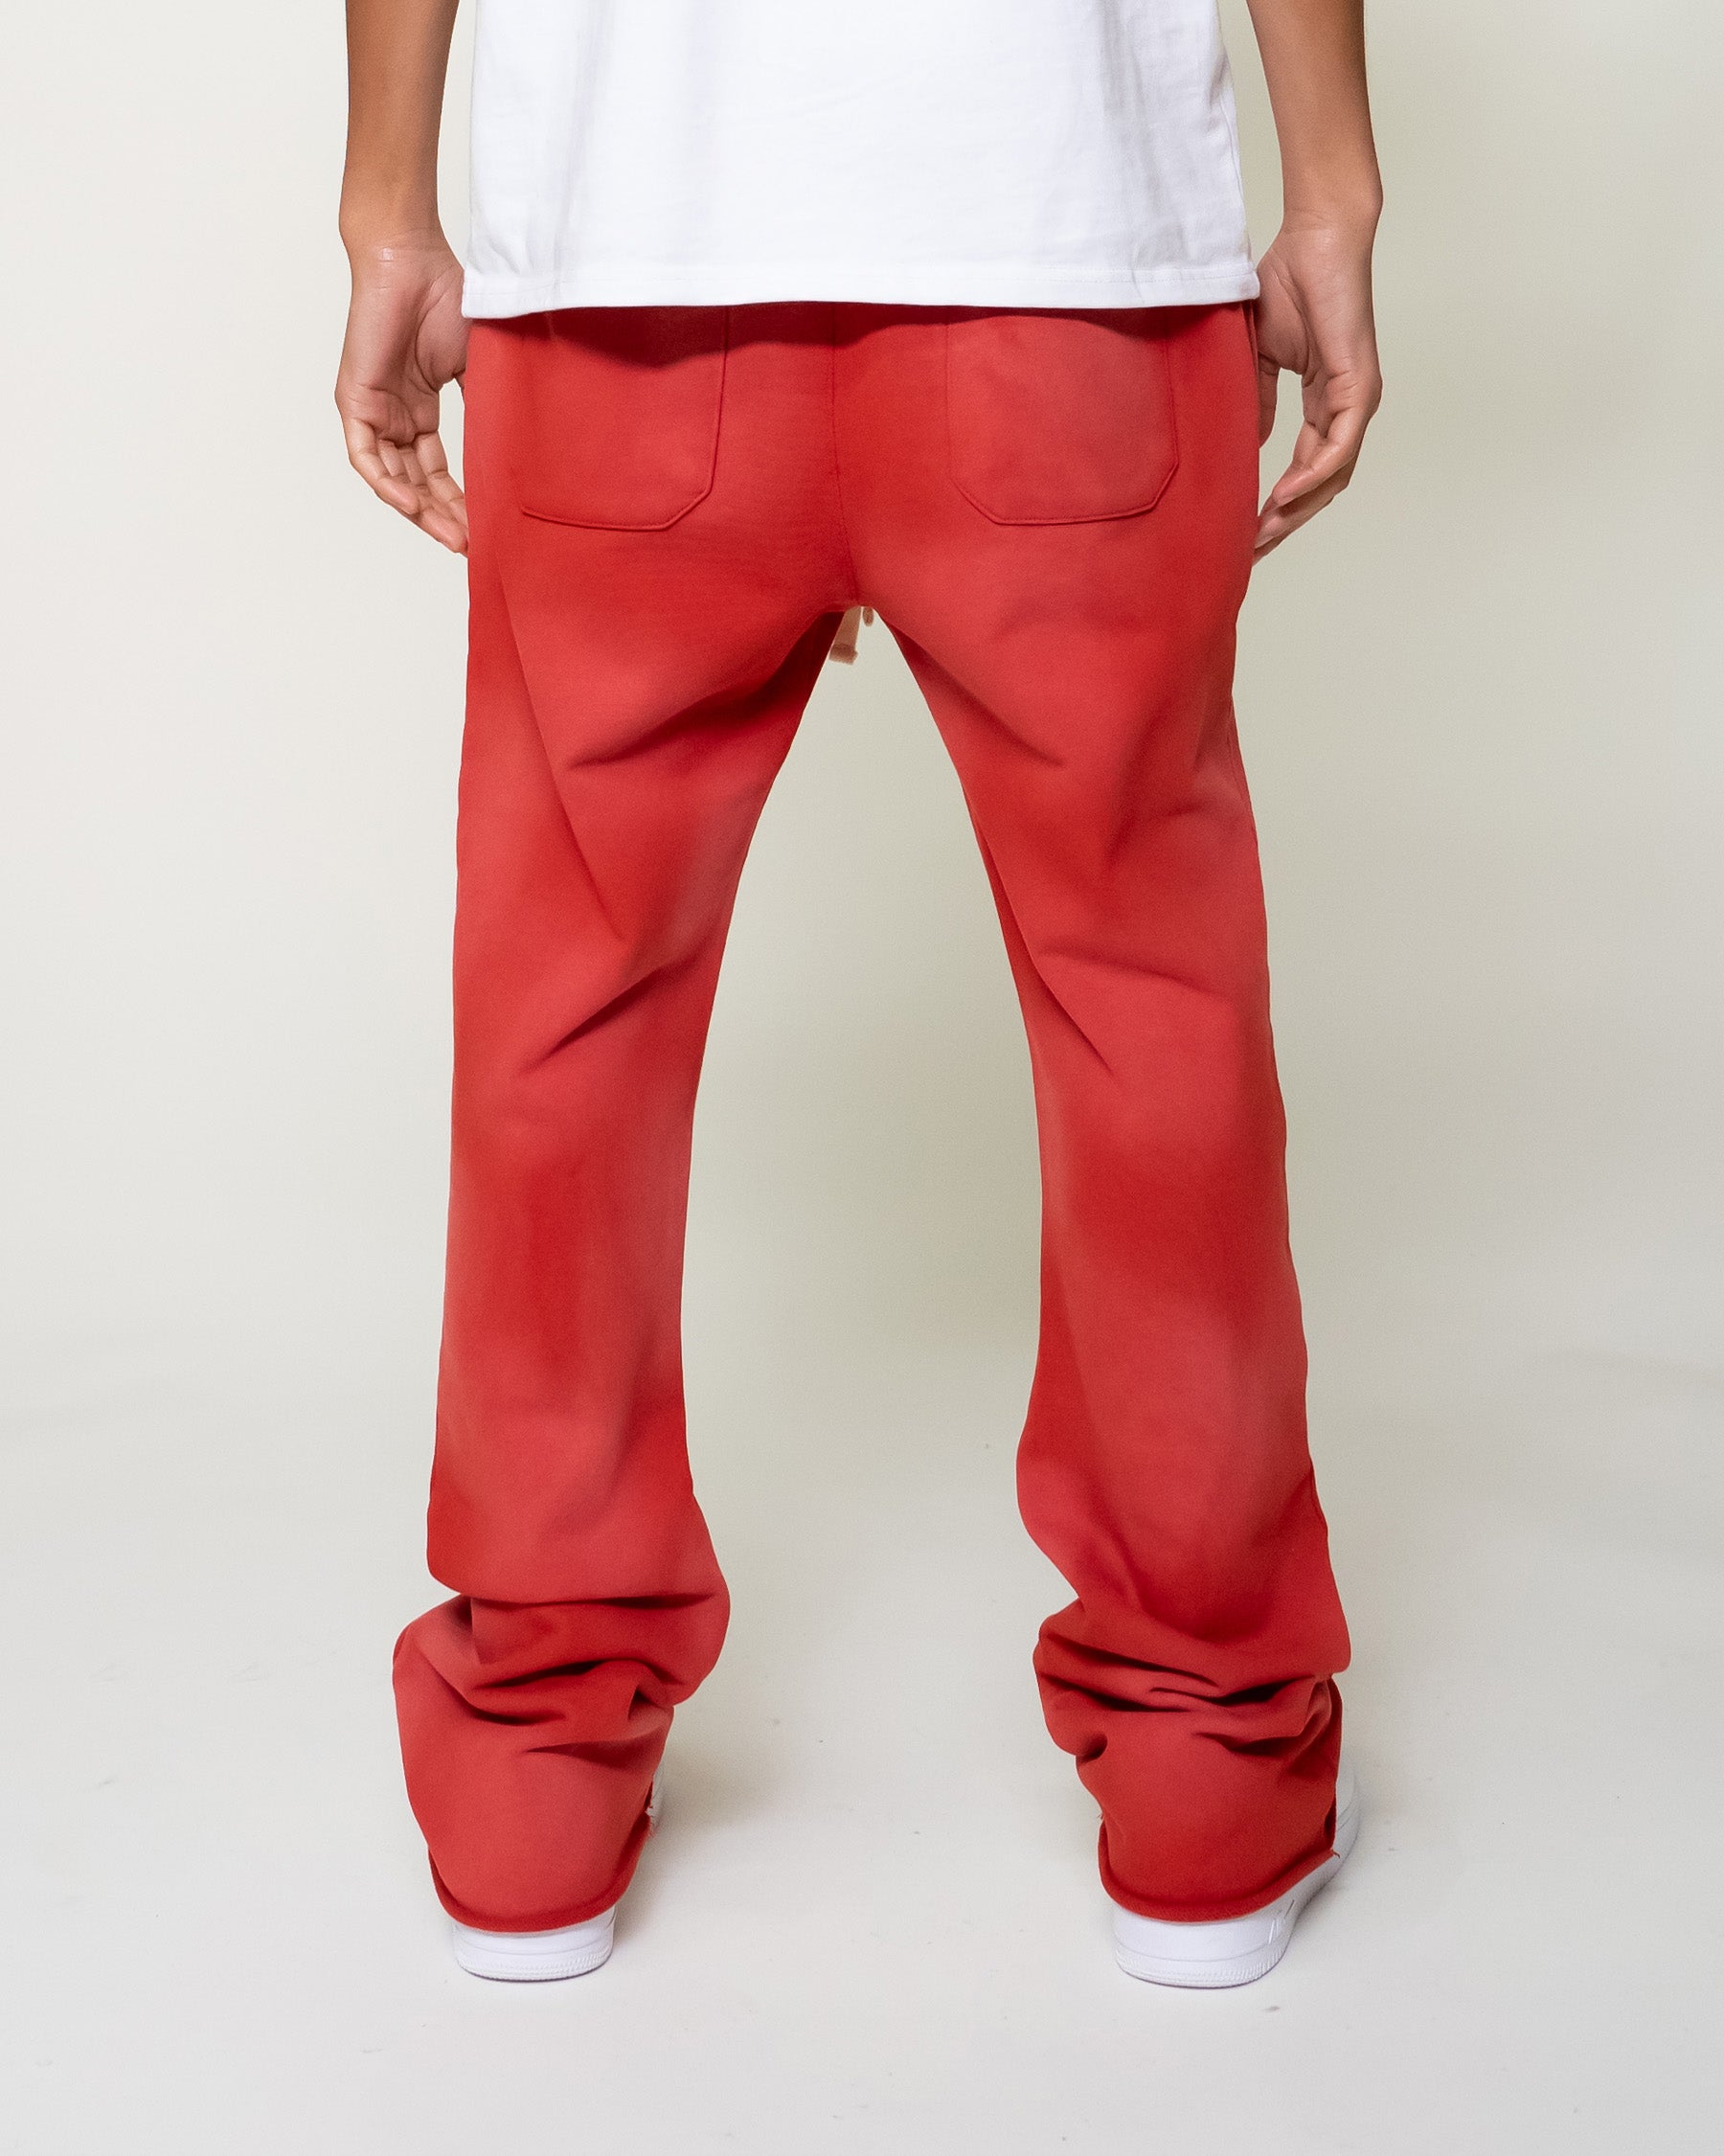 Boys' Performance Jogger Pants - All In Motion™ Red XL